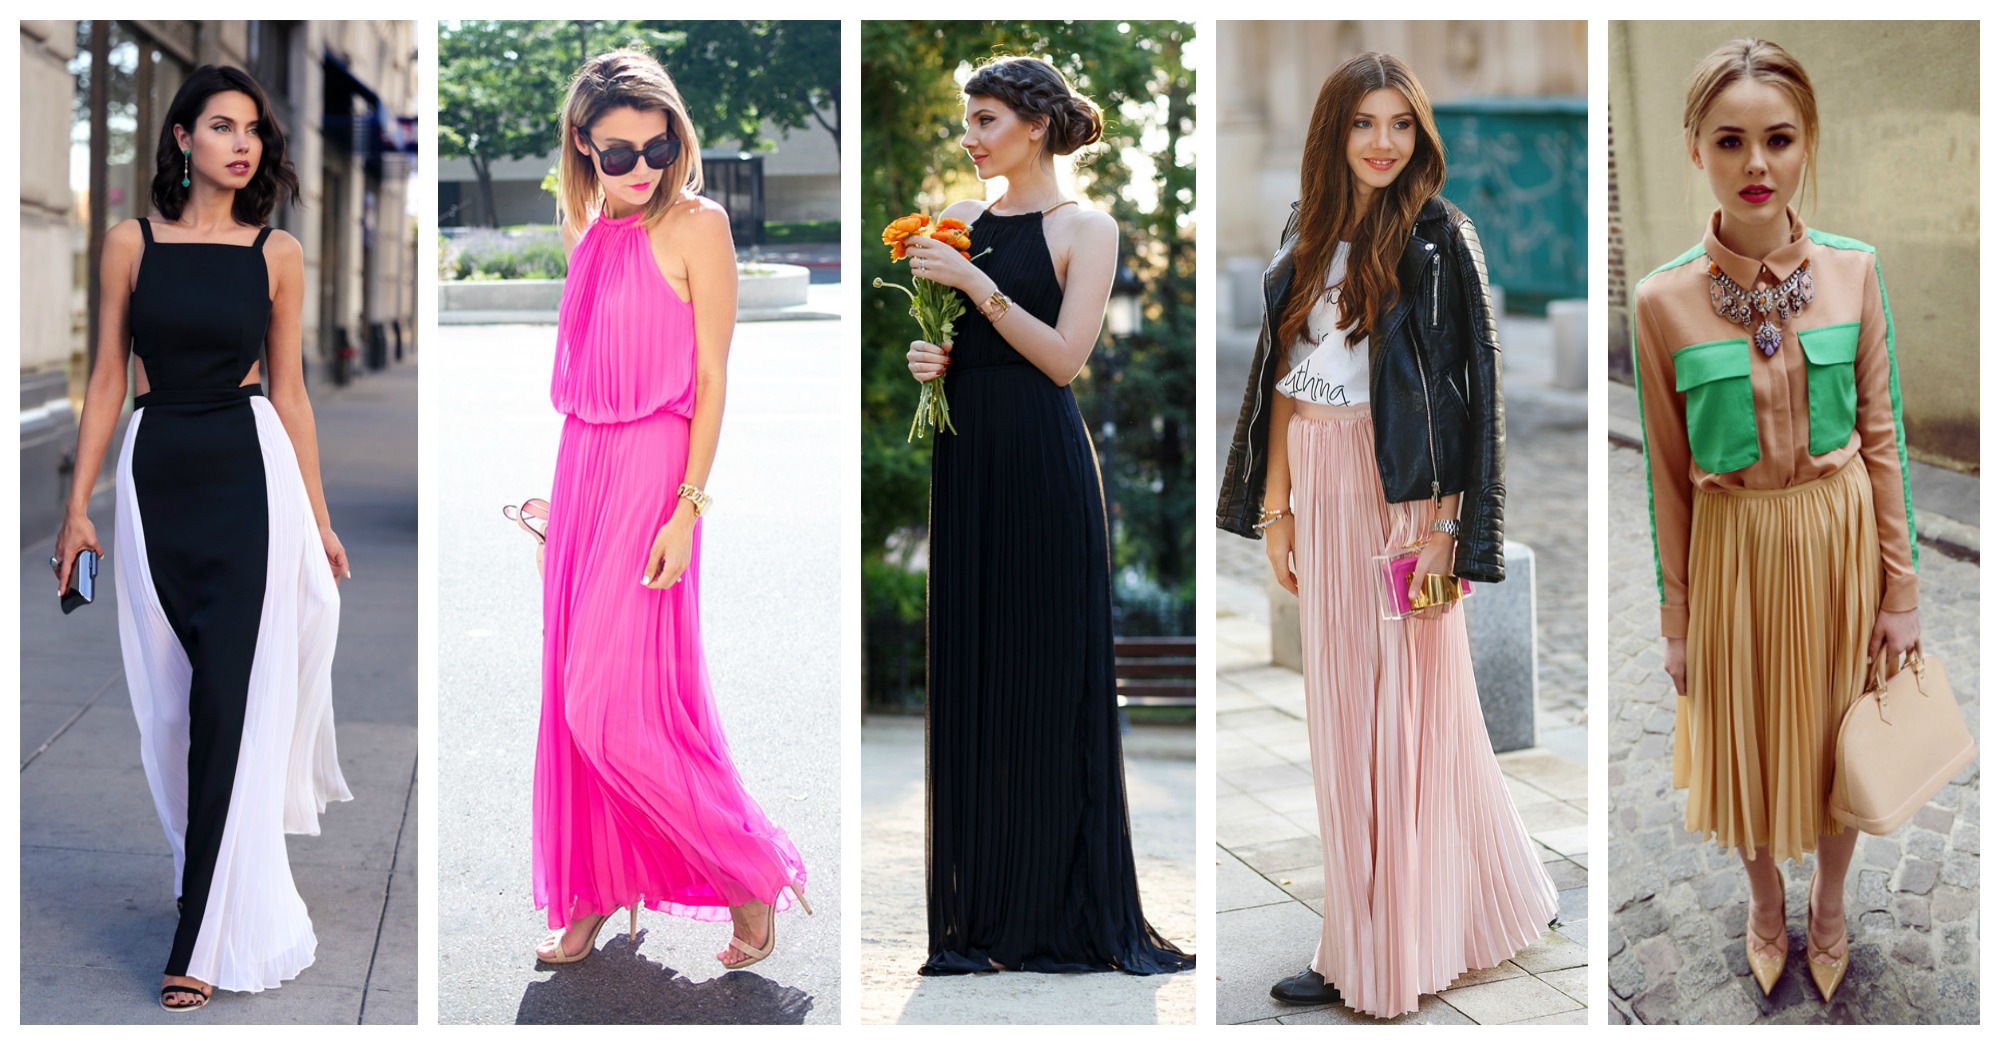 Trendy Spring Outfits with Pleated Skirts and Dresses